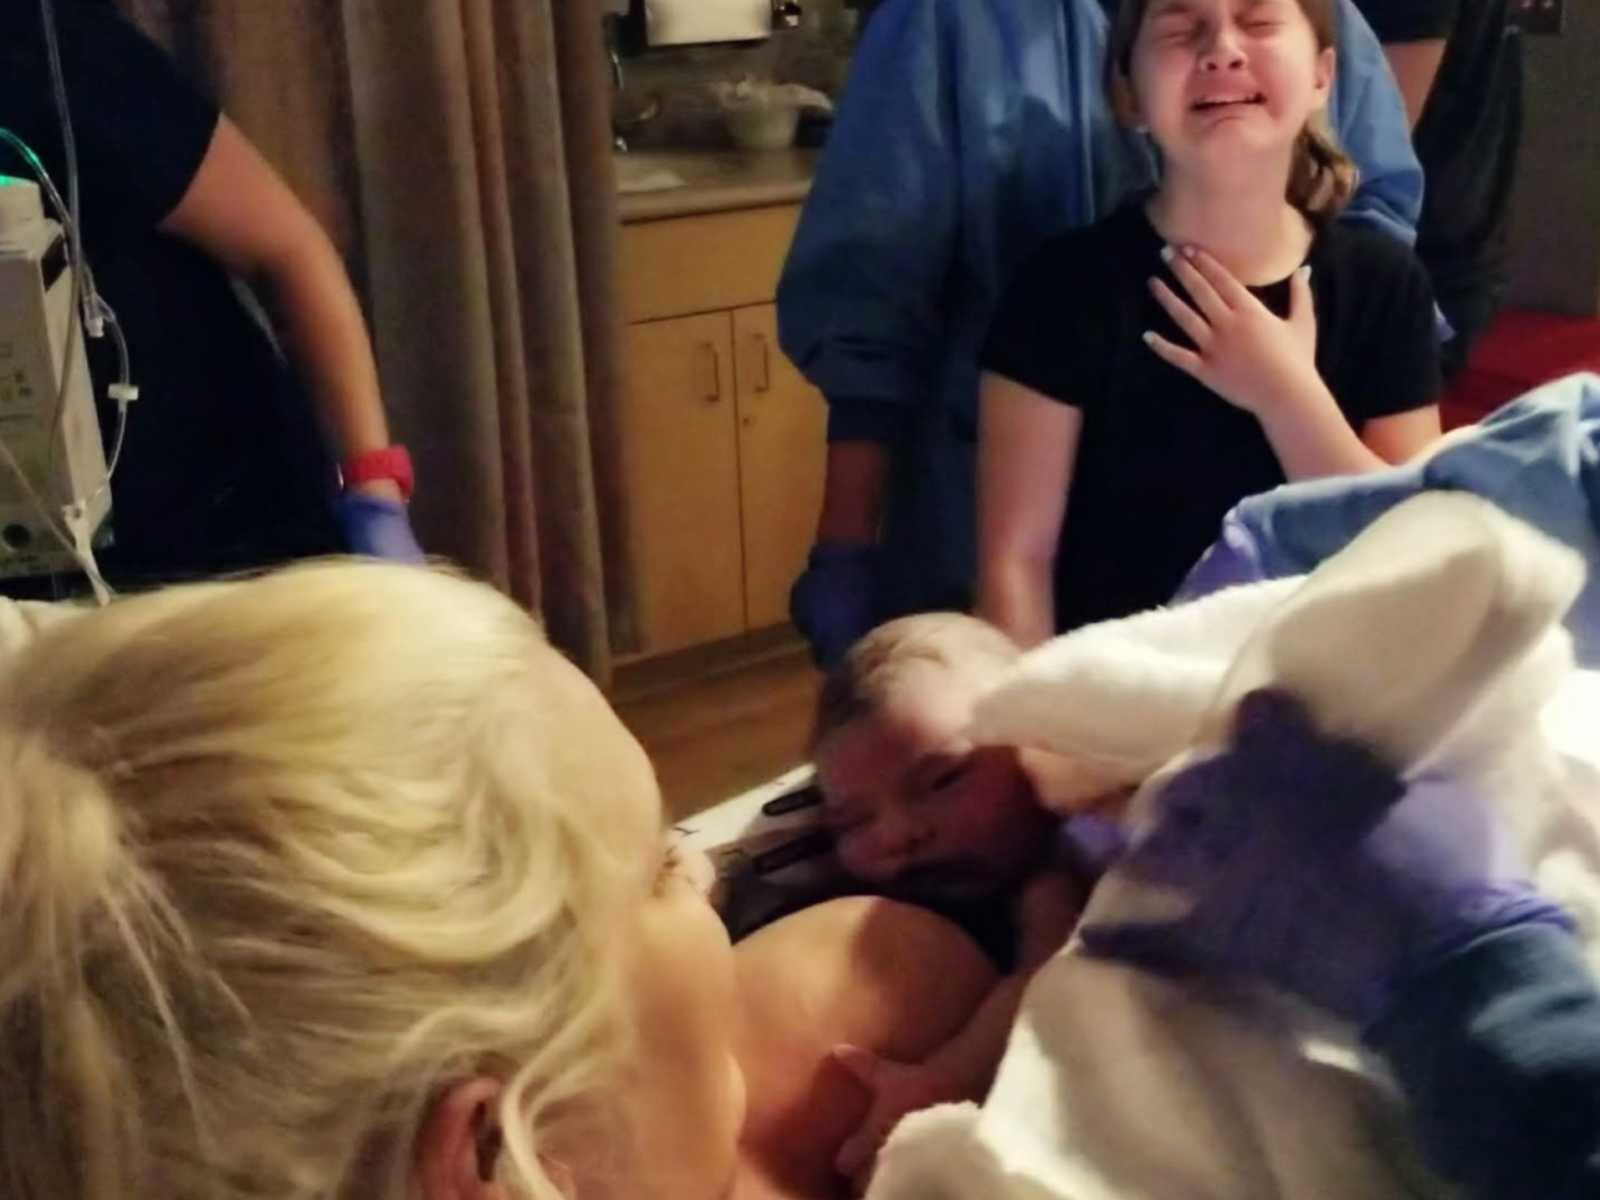 older sister holds hand to chest as she cries at the birth of her newborn sibling held in moms arm in hospital bed